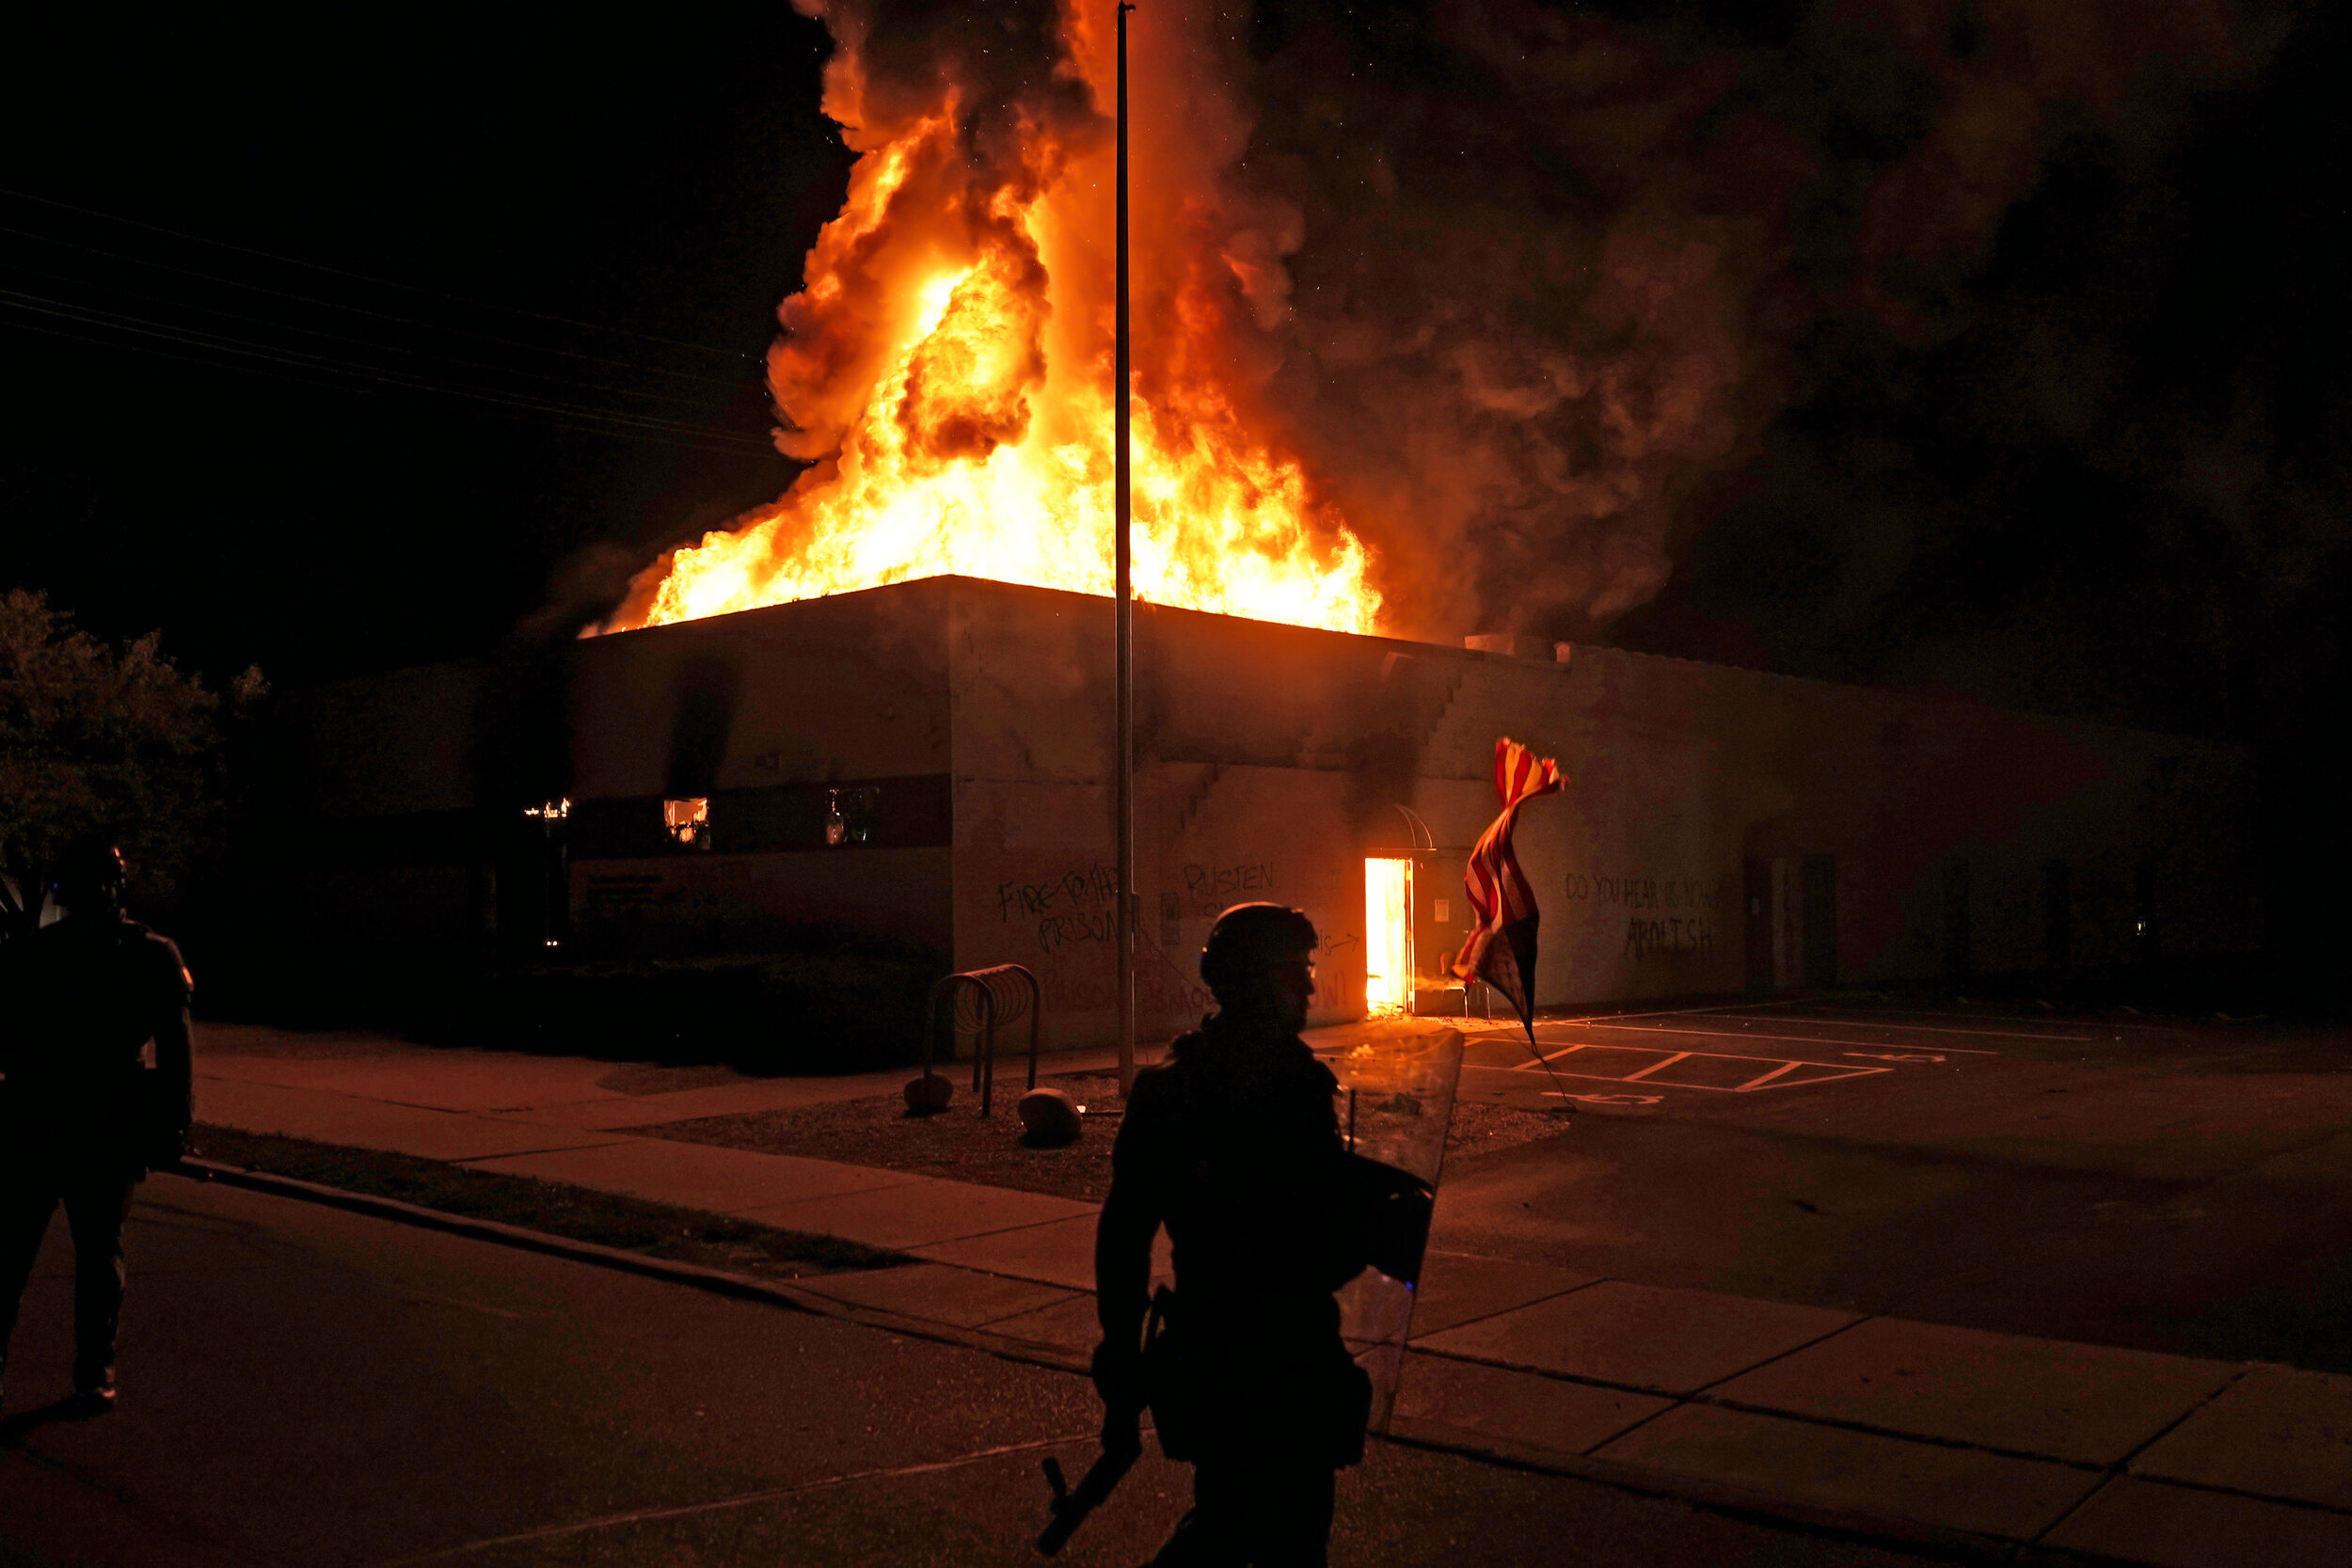  An American flag falls from its pole as police attempt to secure the area after protesters set fire to the department of corrections building, Aug. 24, 2020, in Kenosha, Wis. Protests have erupted following the police shooting of Jacob Blake a day e